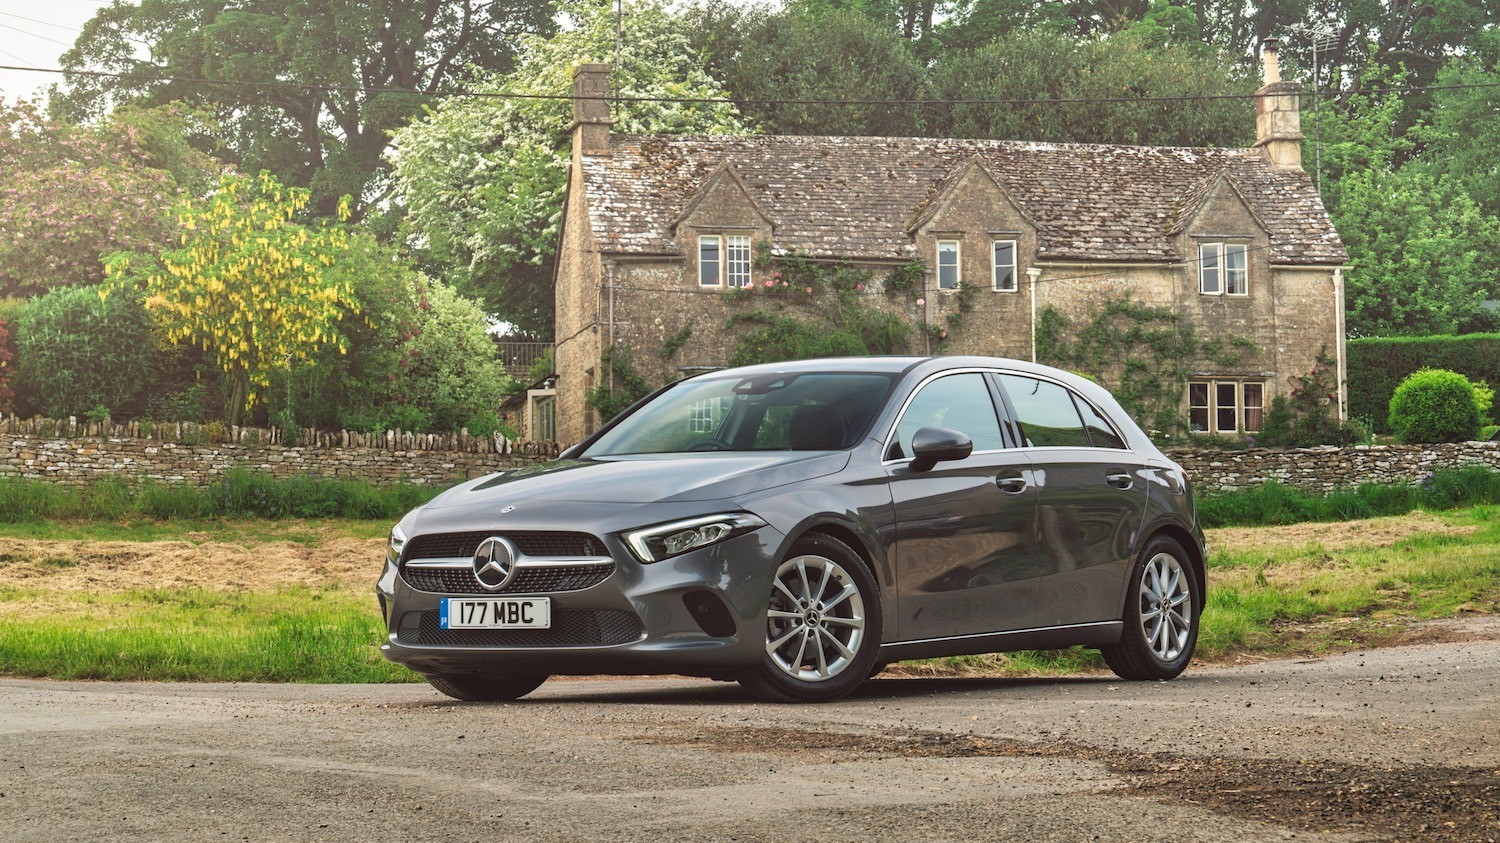 Tim Barnes-Clay reviews the New Mercedes-Benz A-Class 34